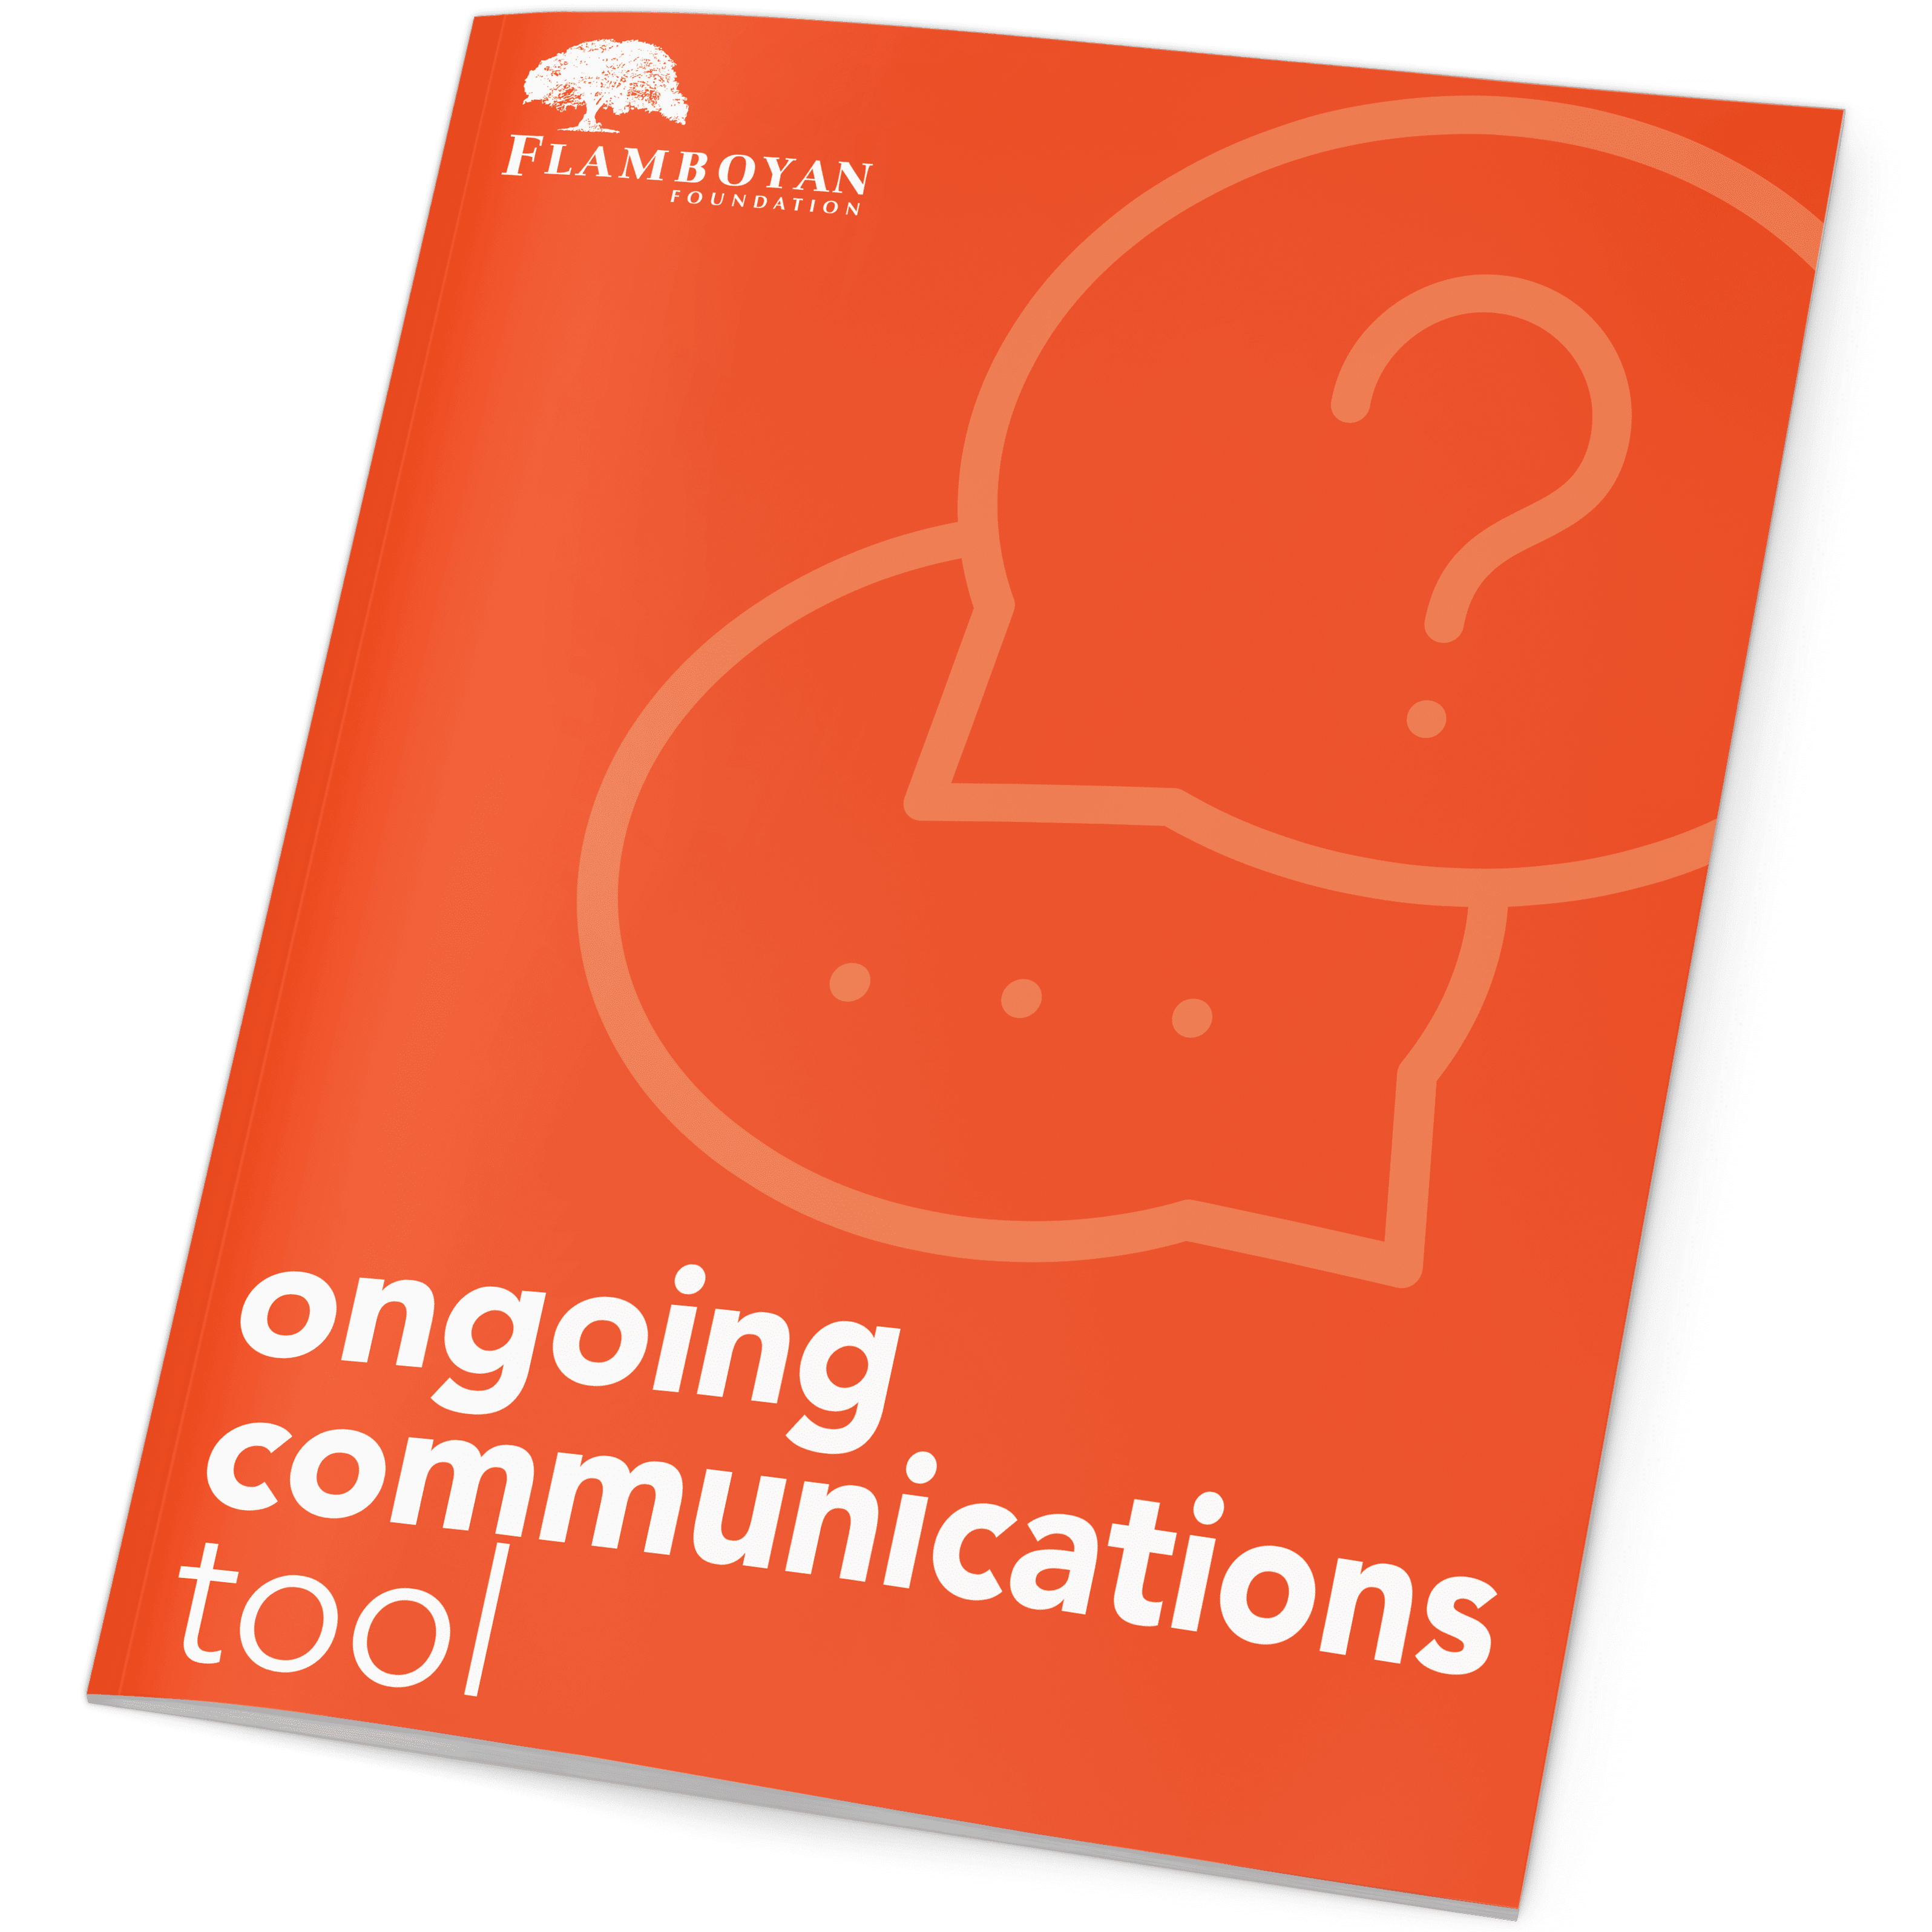 Ongoing Communications Tool by Flamboyan Foundation